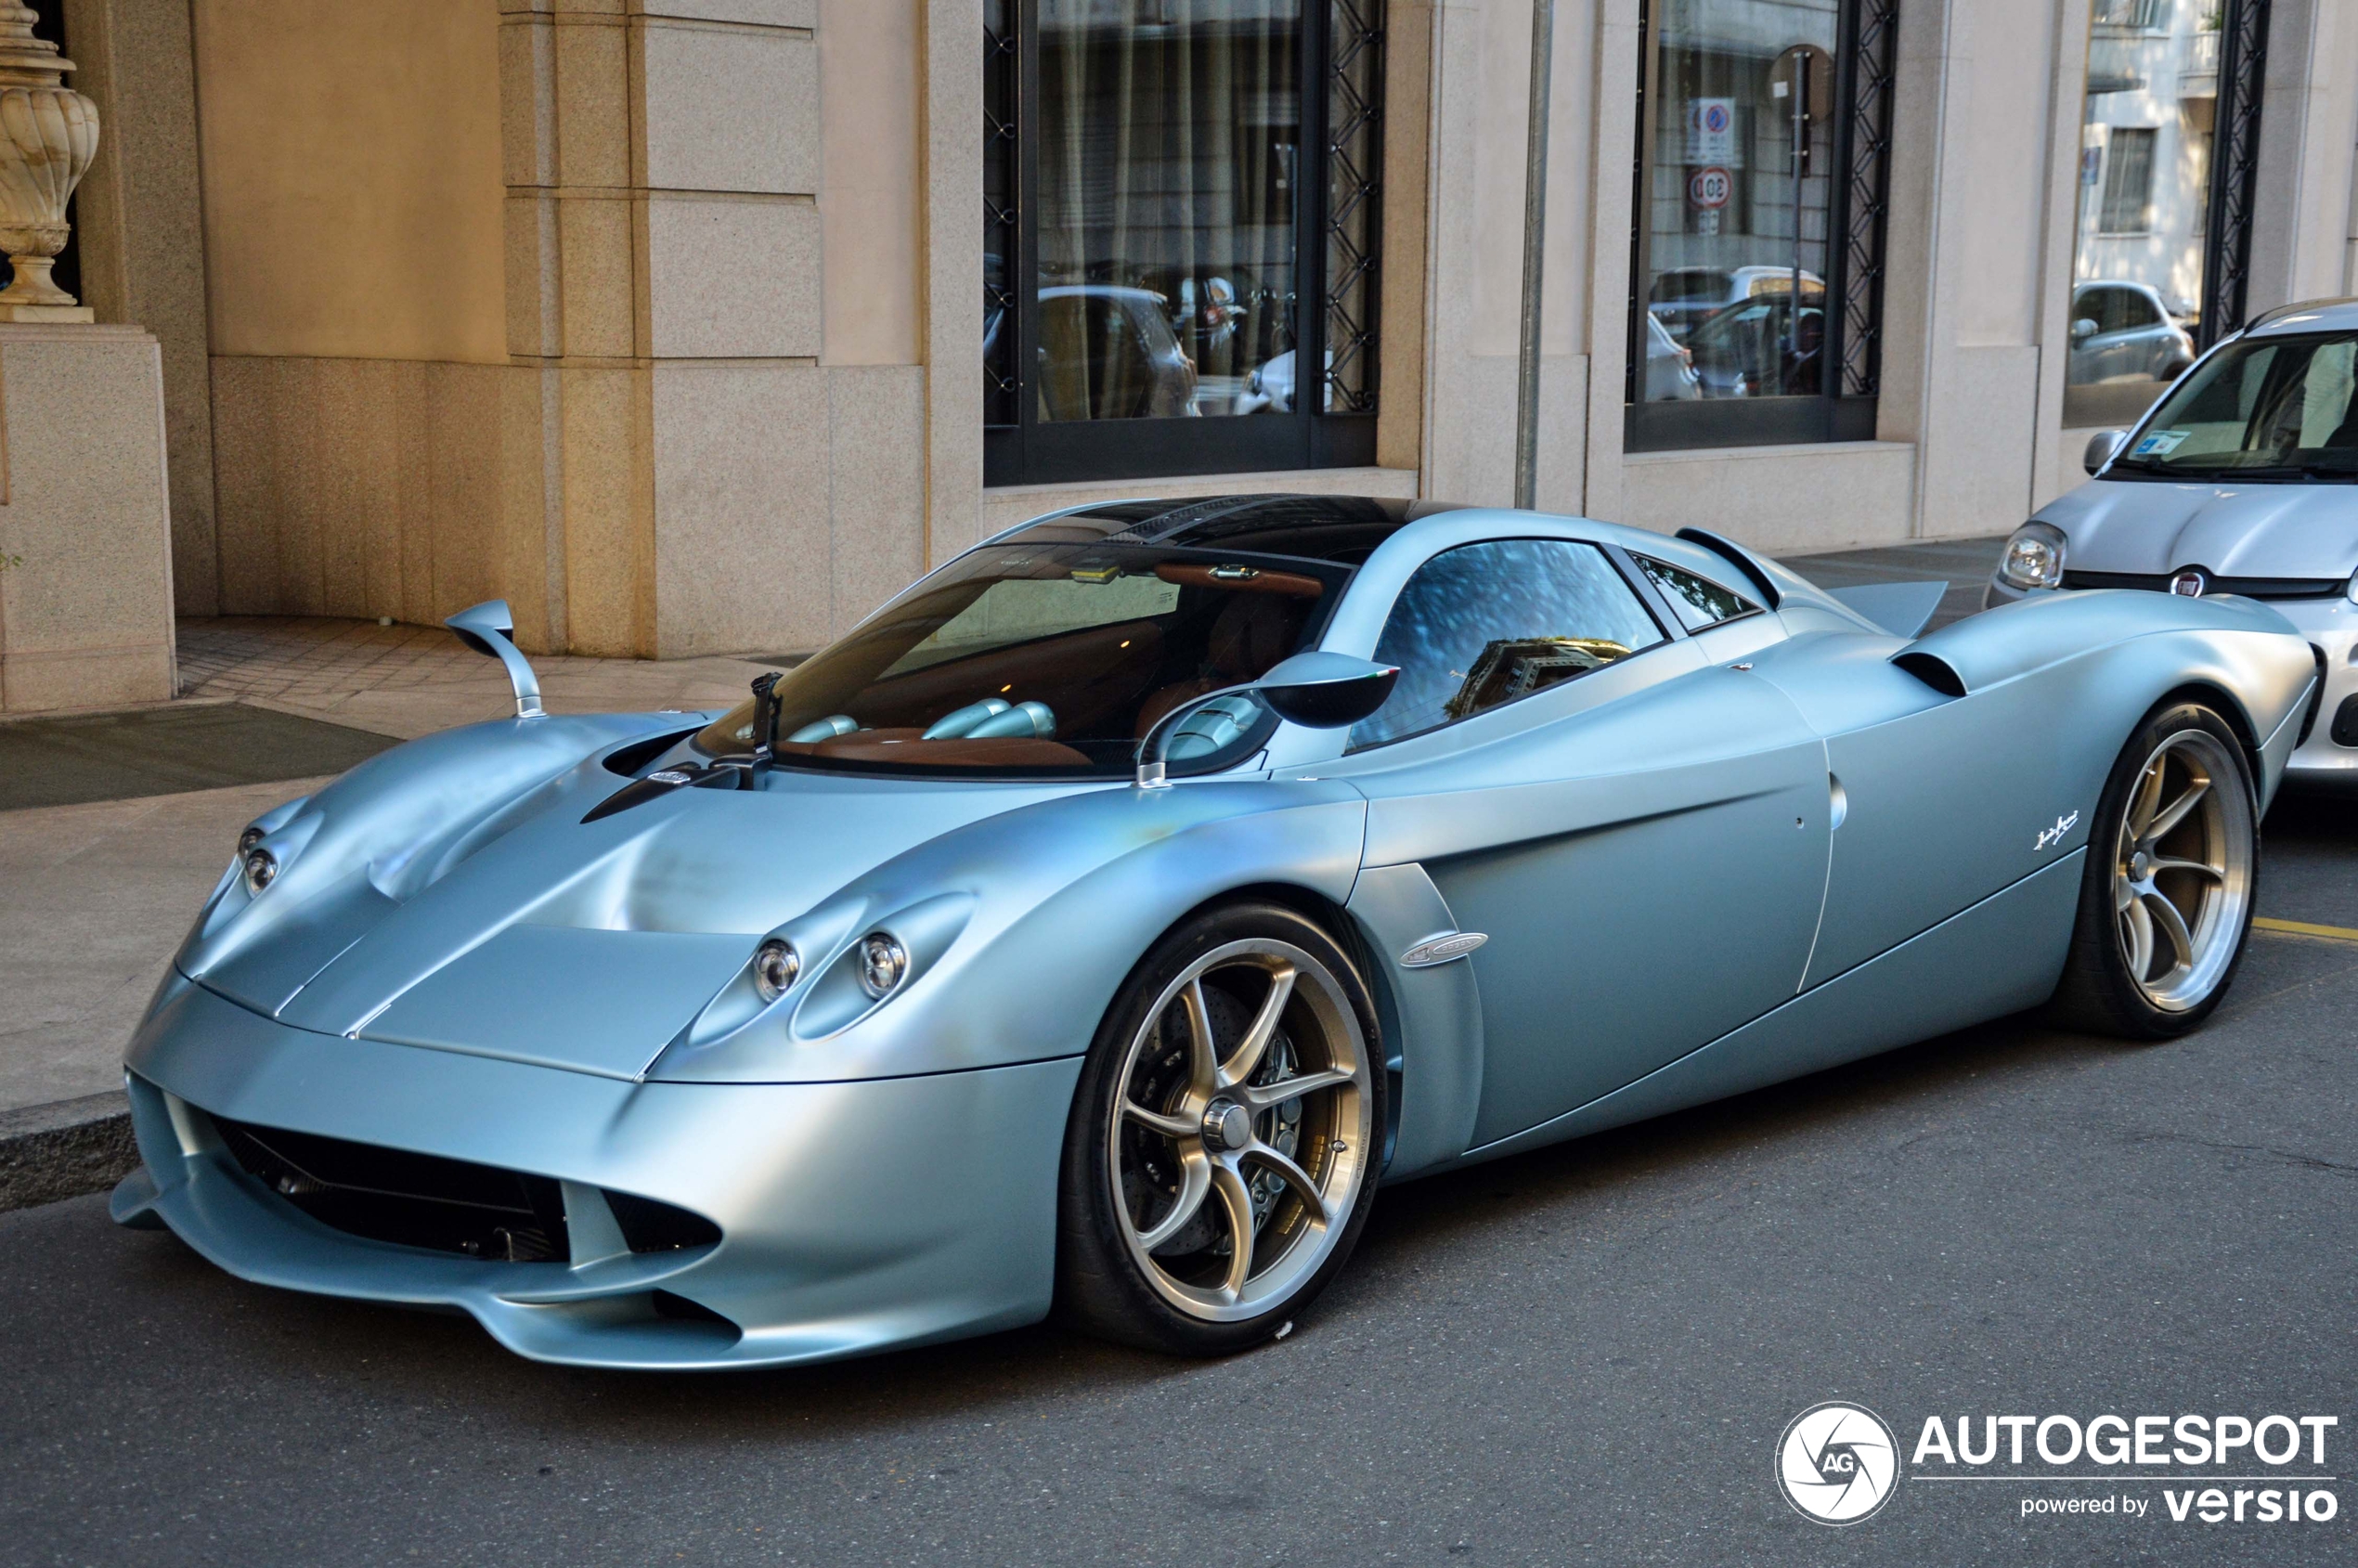 The slightly better exclusive Huayra